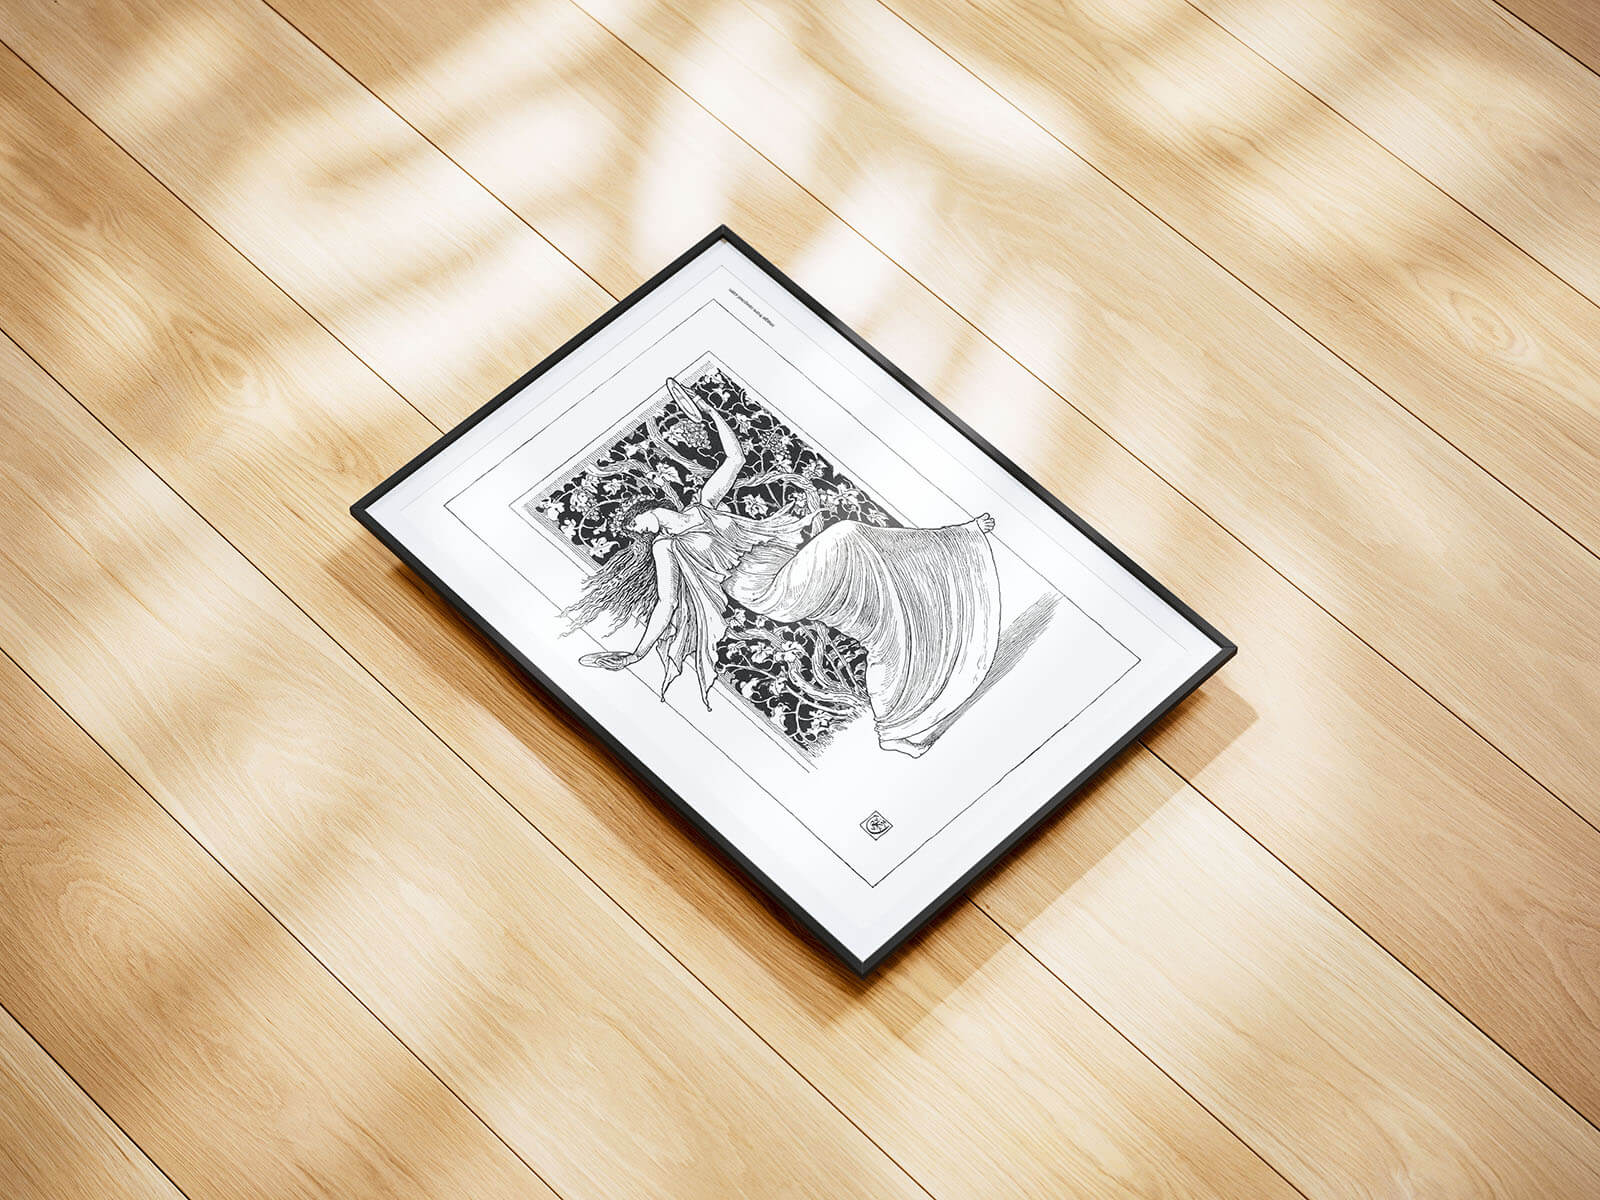 Free Poster On The Floor Mockup